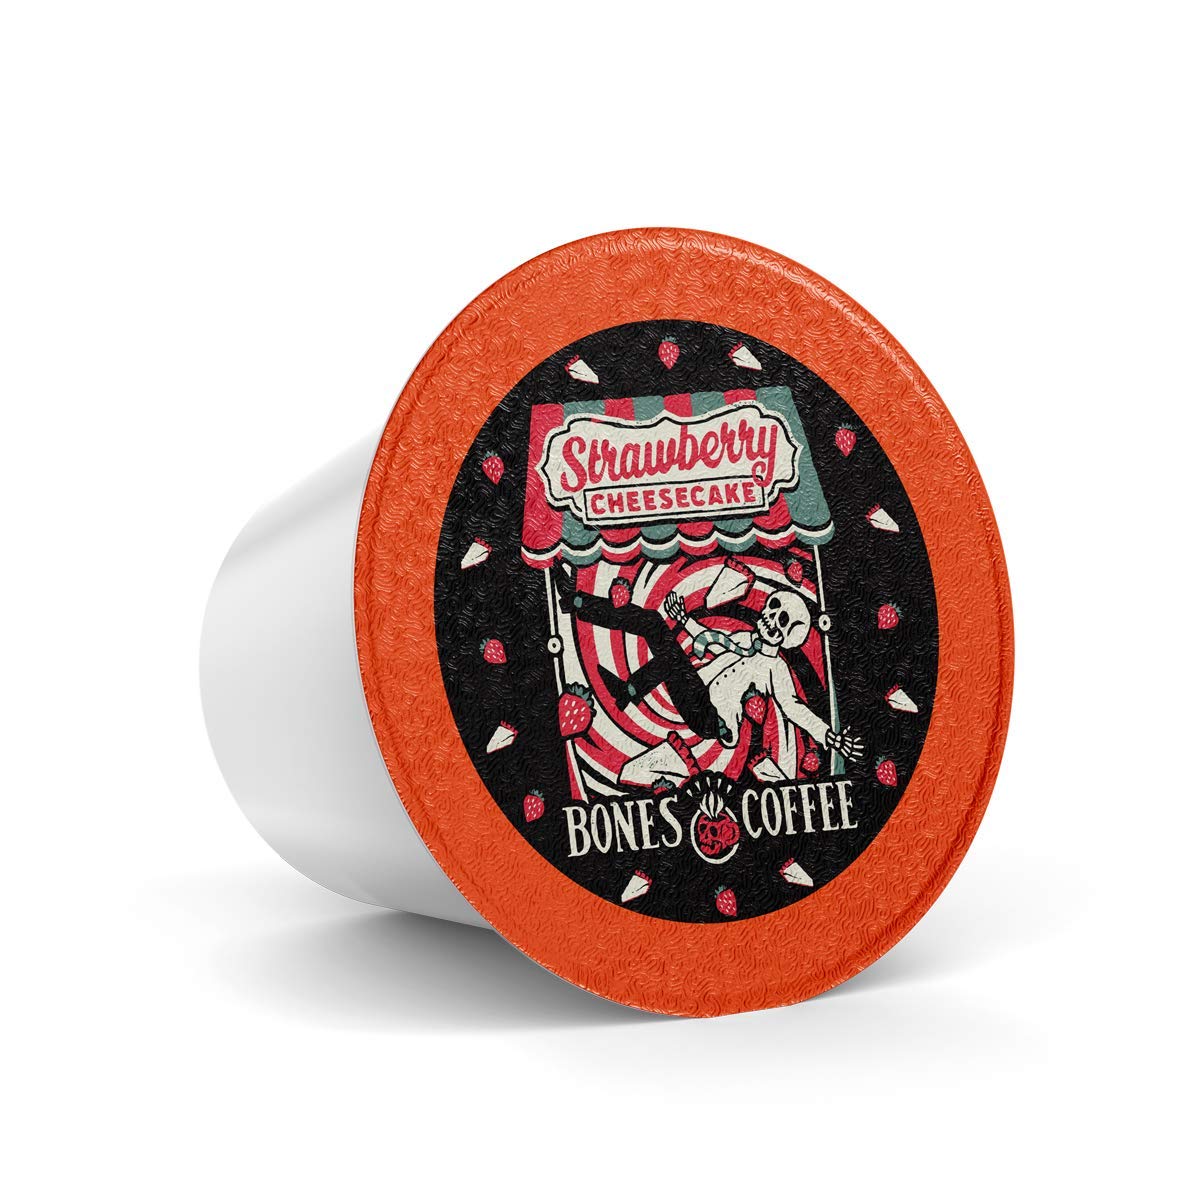 Strawberry Cheesecake Flavored Coffee K Cups Pods